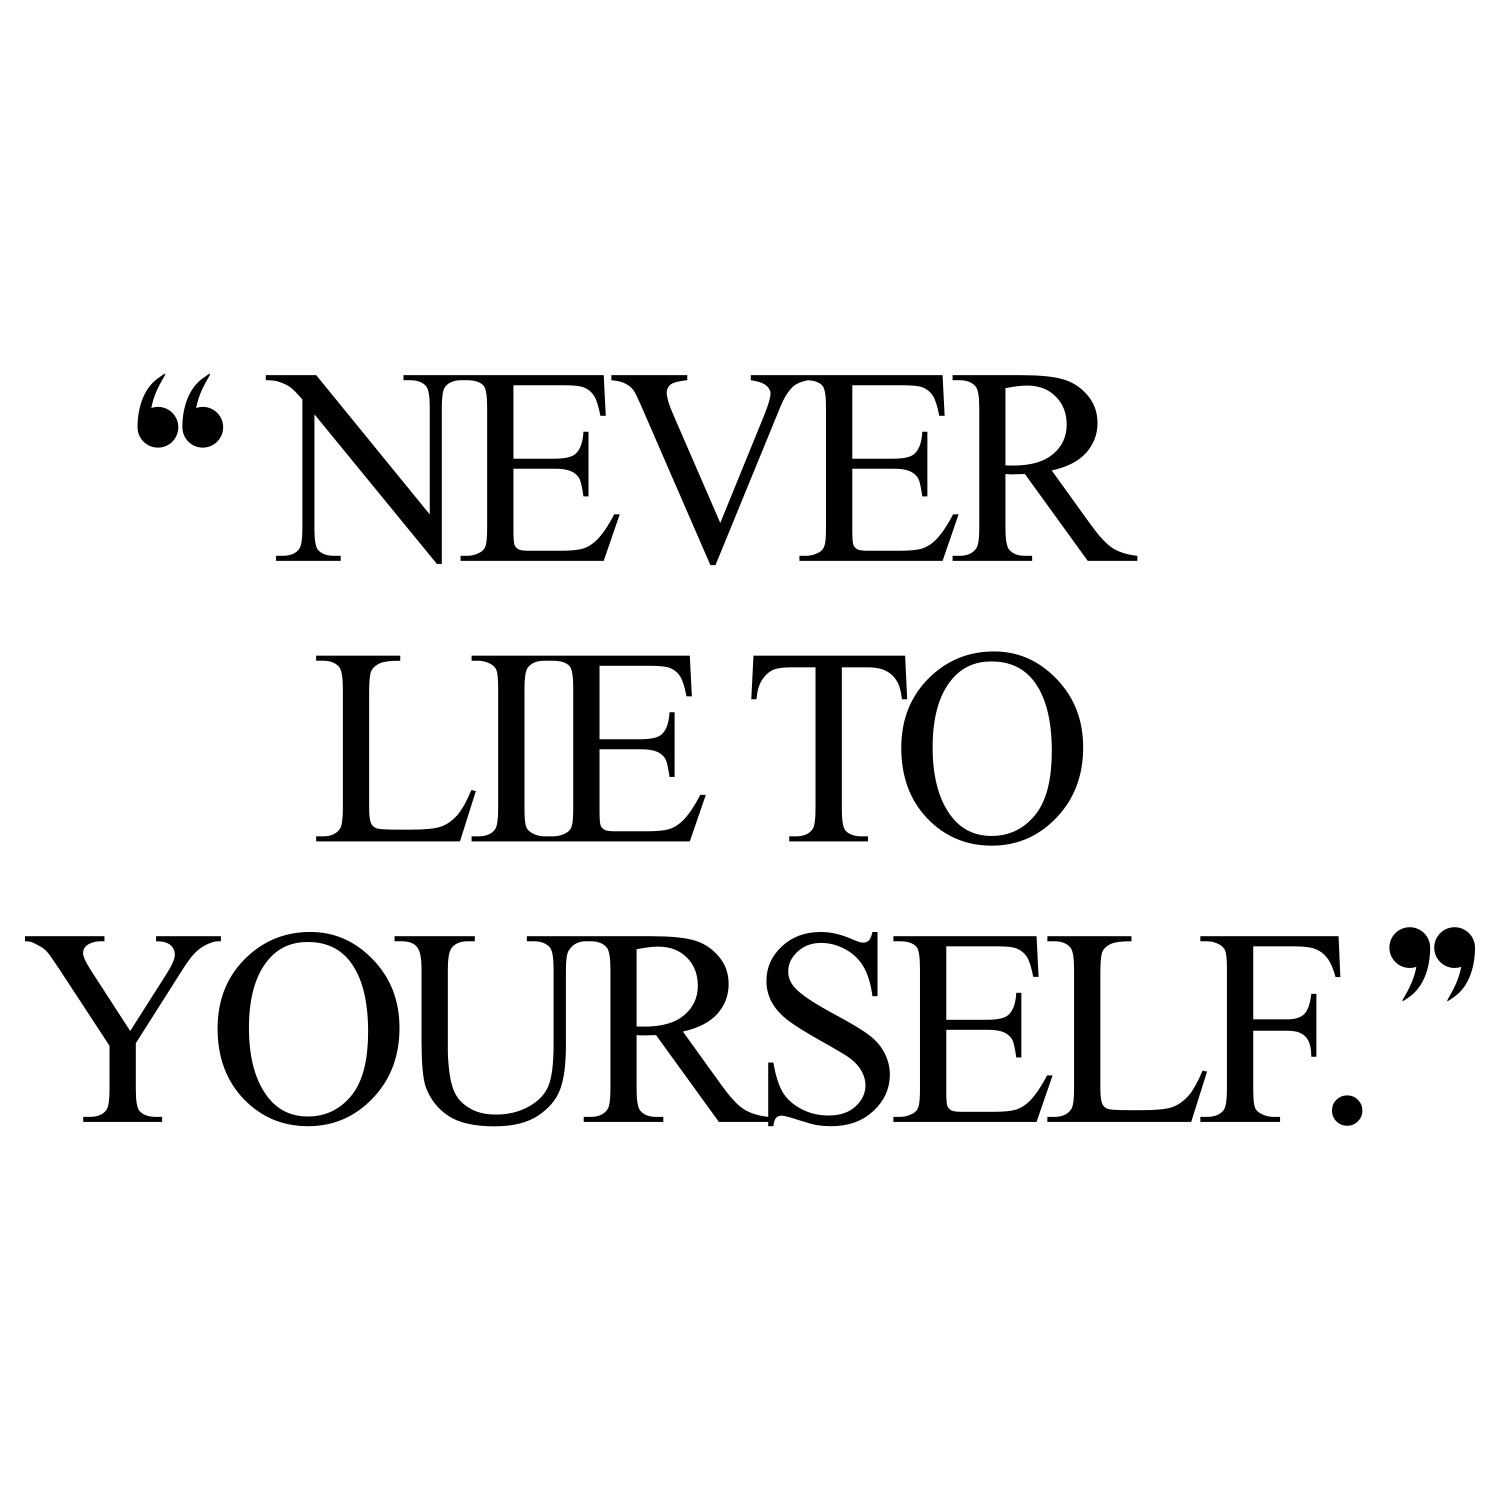 Never lie to yourself! Browse our collection of motivational exercise and fitness quotes and get instant healthy lifestyle inspiration. Stay focused and get fit, healthy and happy! https://www.spotebi.com/workout-motivation/never-lie-to-yourself/